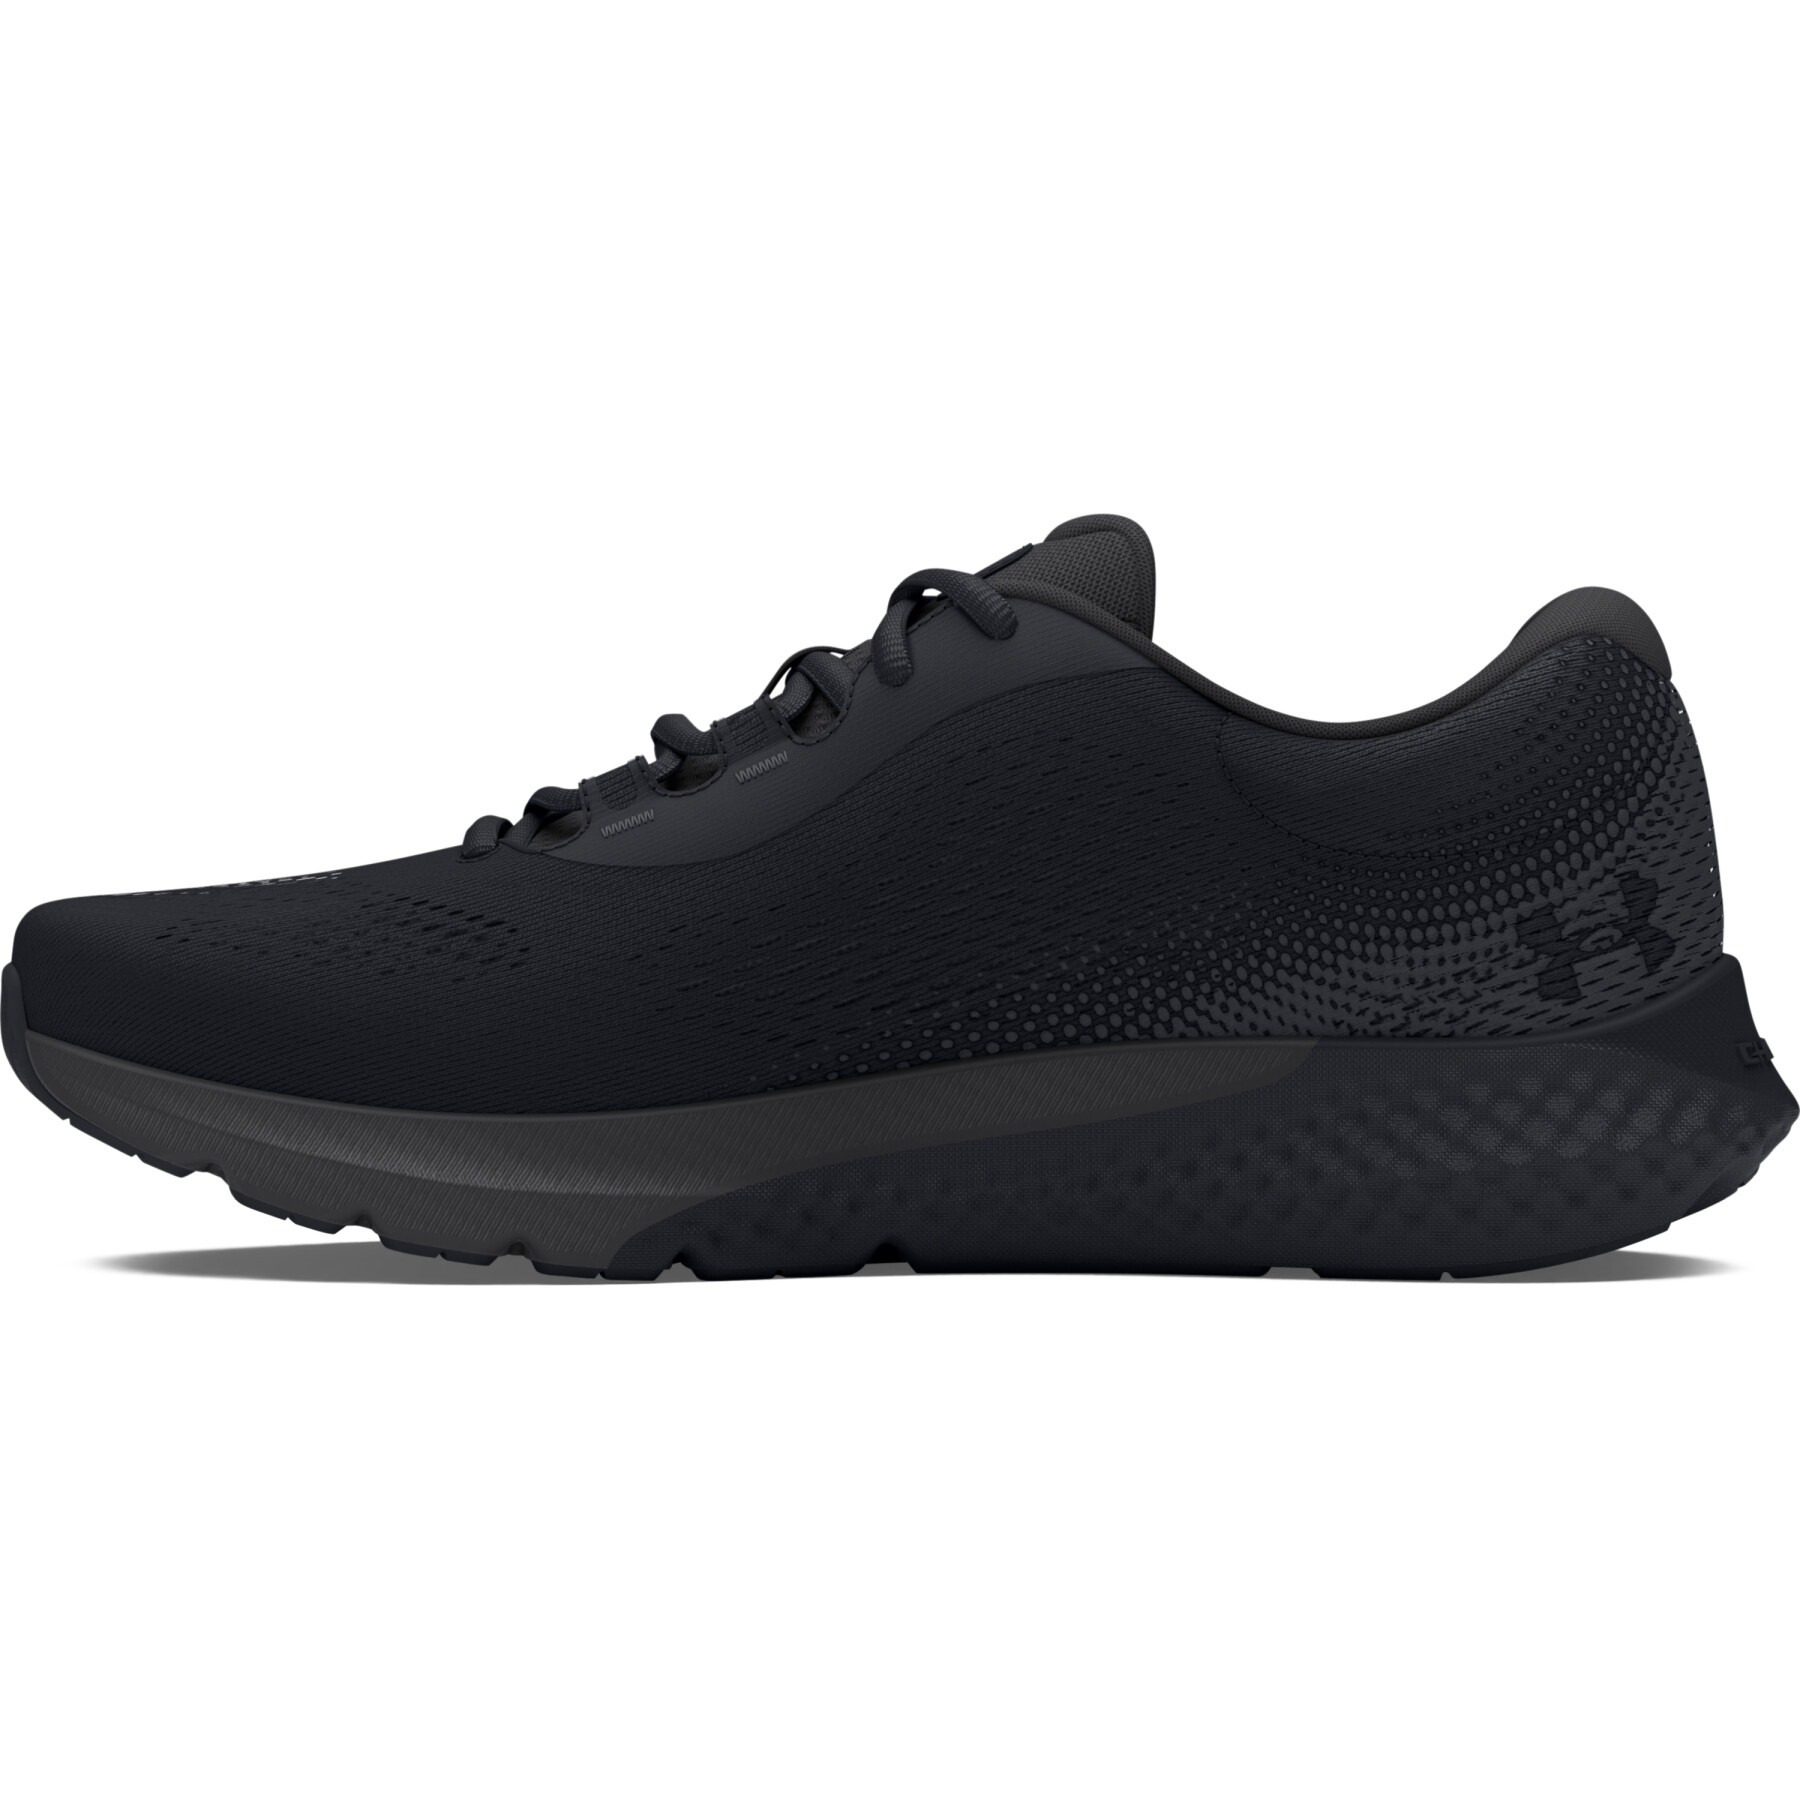 Laufschuhe Under Armour Charged Rogue 4